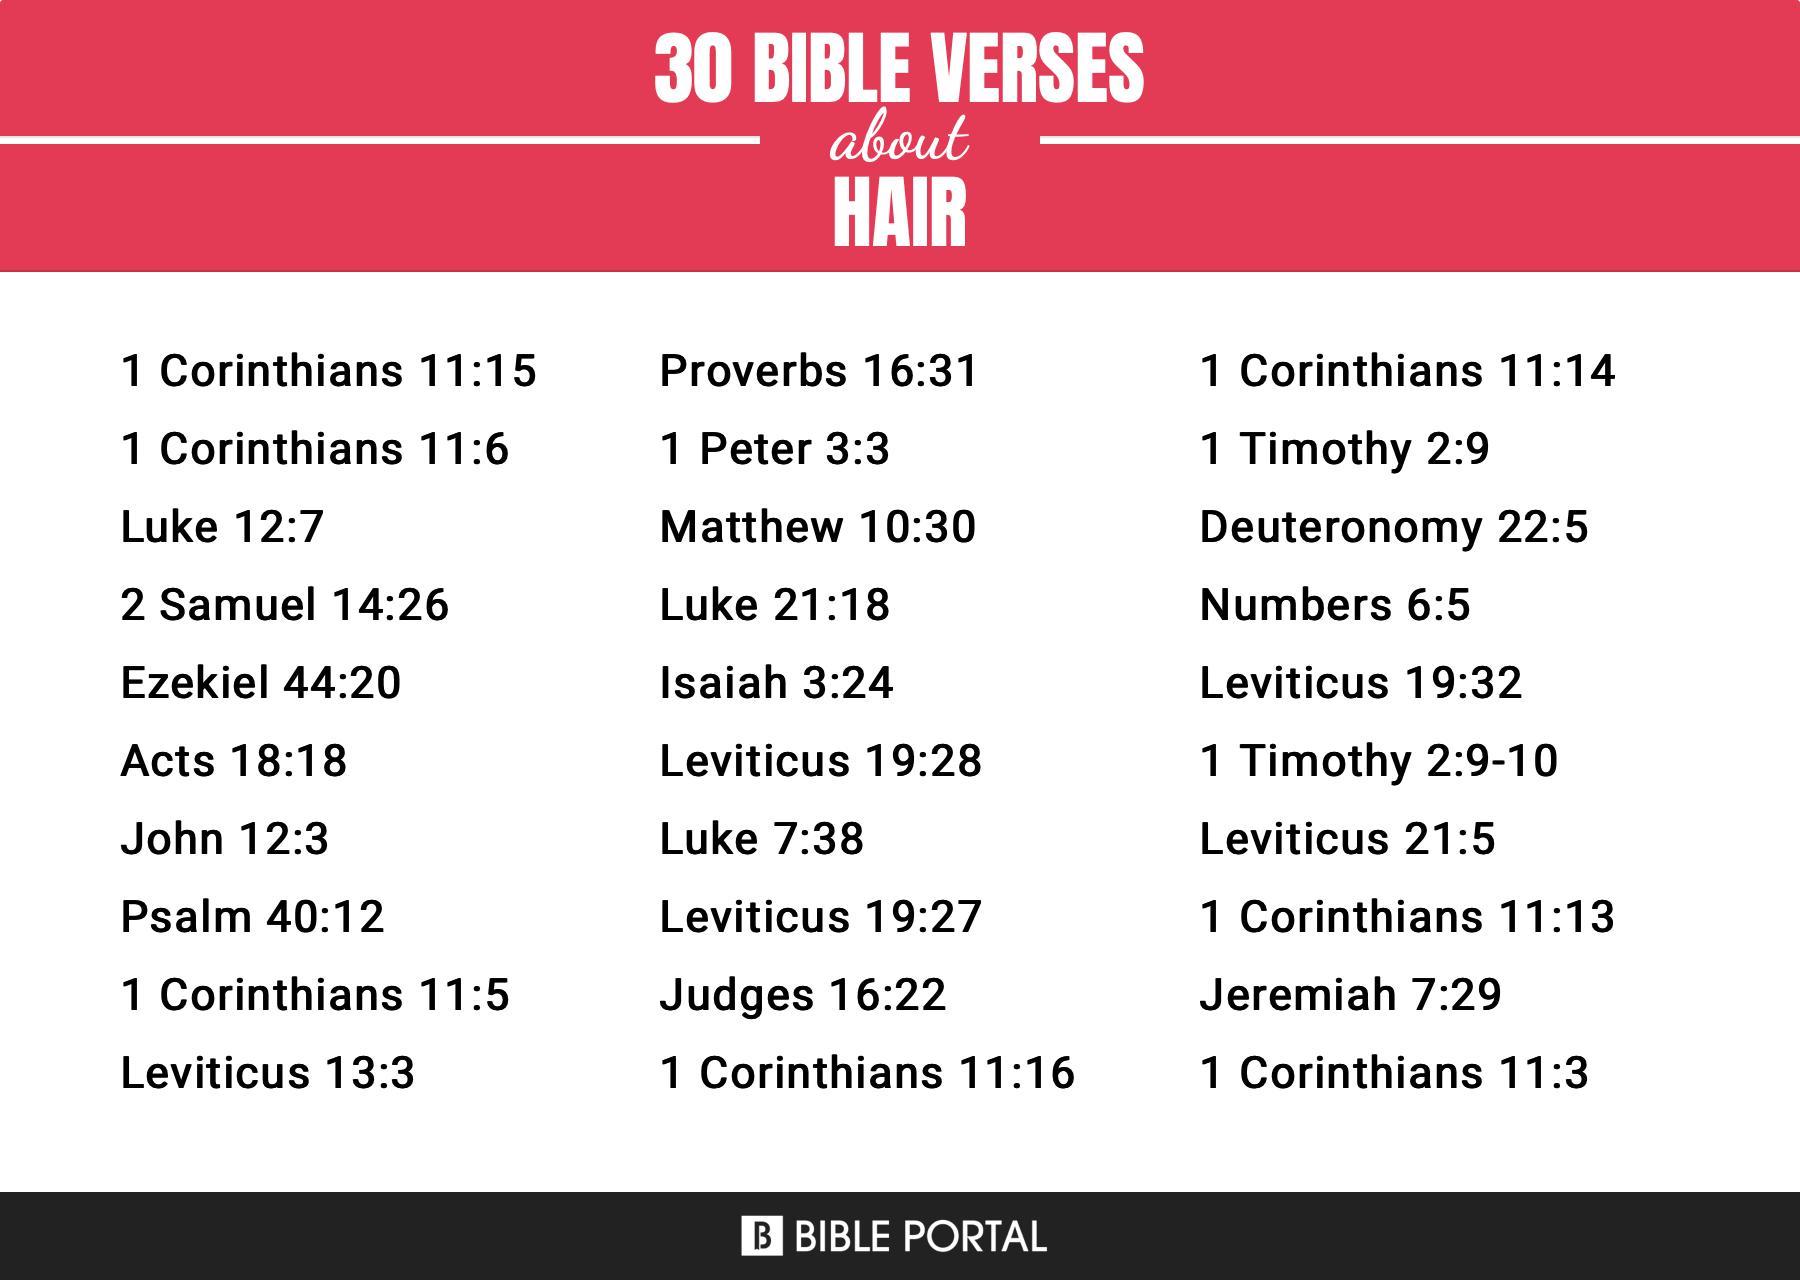 89 Bible Verses about Hair